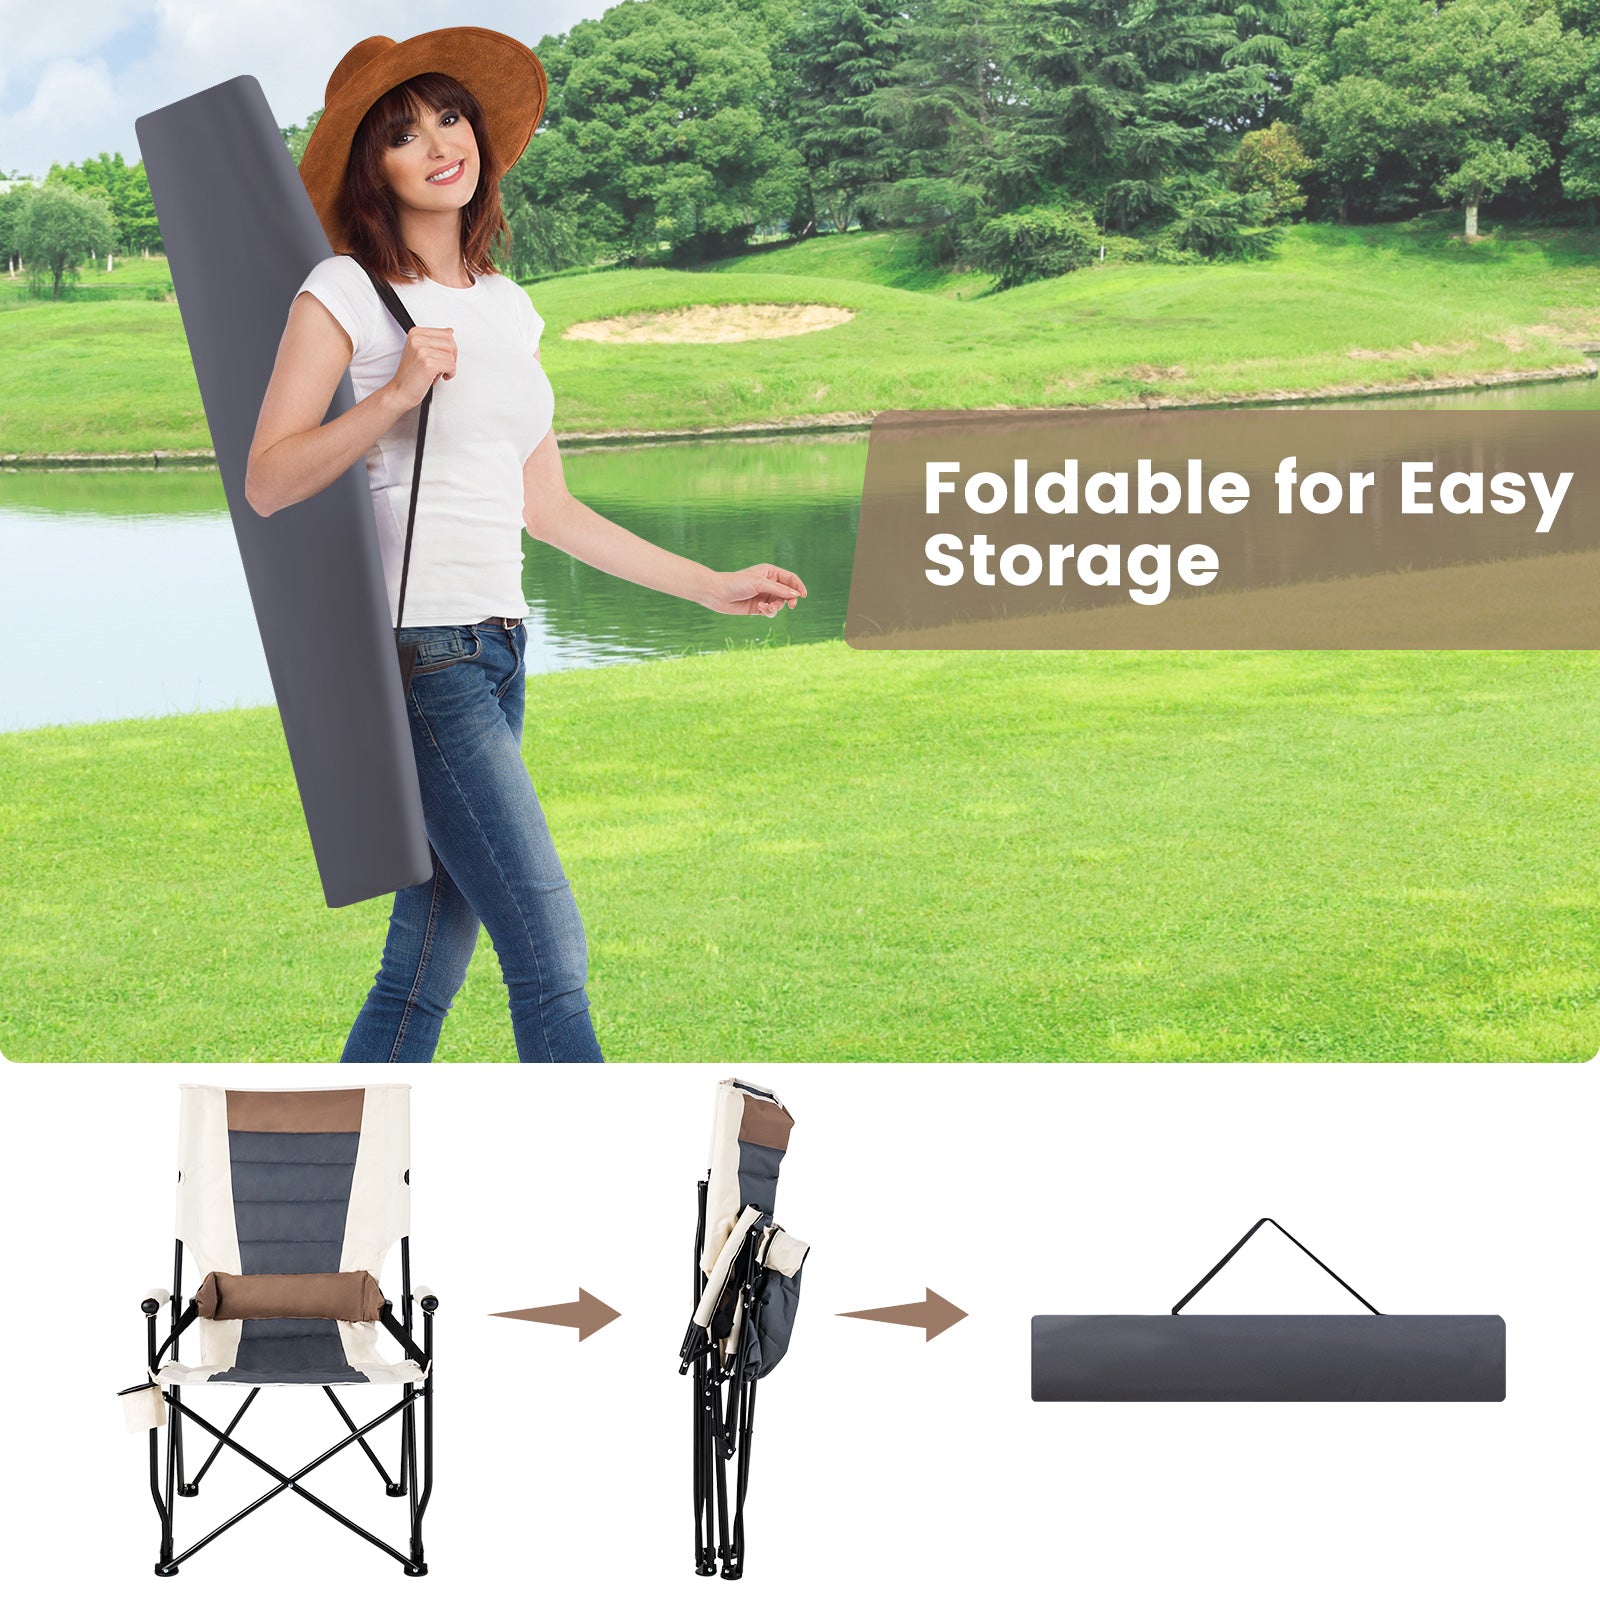 Foldable and Adjustable Camping Chair with Cup Holder for Outdoor Fishing